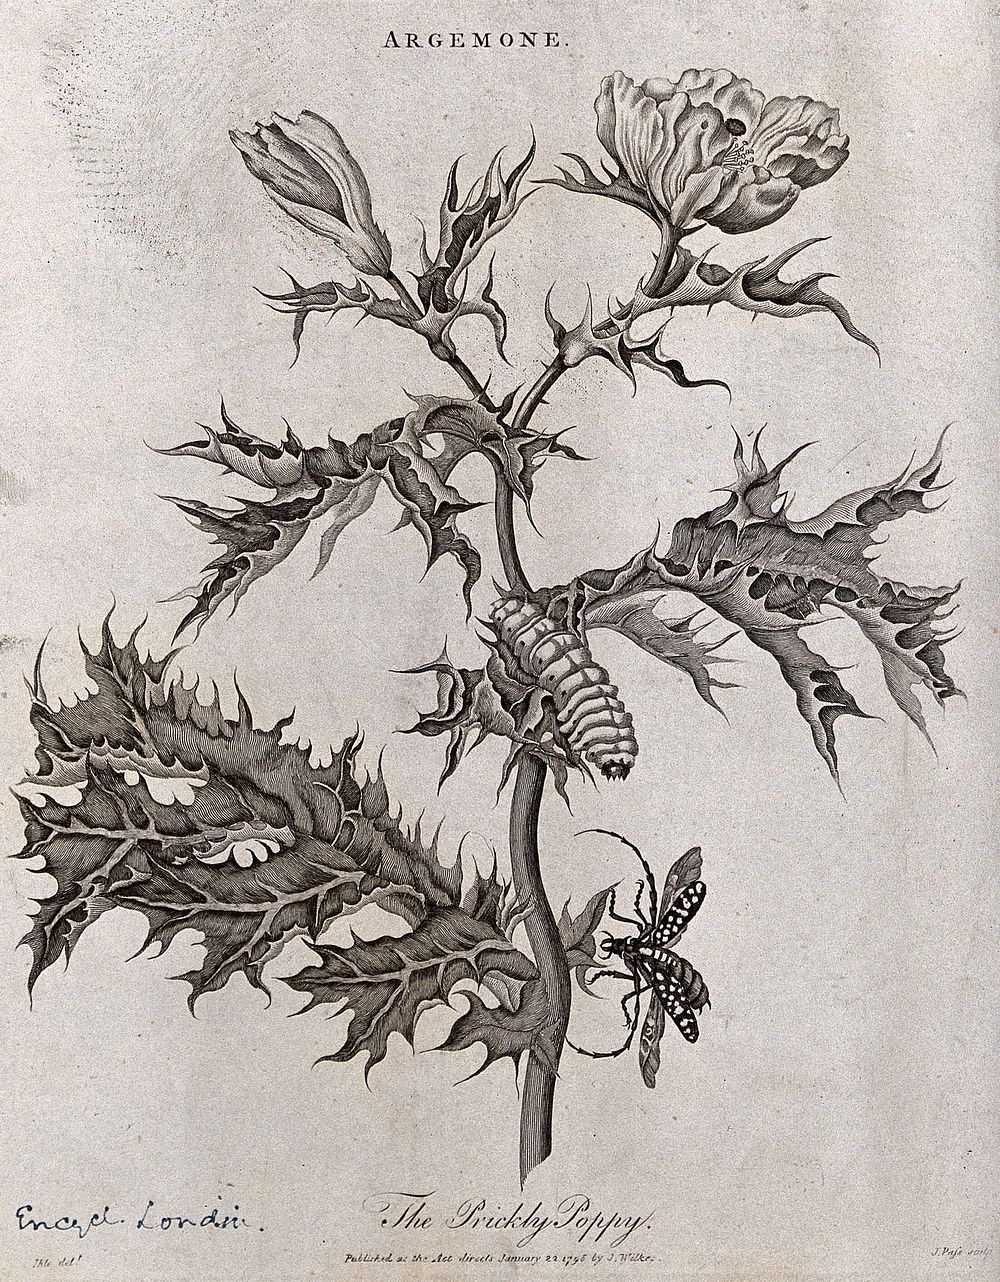 Prickly poppy (Argemone mexicana): flowering stem with caterpillar and insect. Etching by J. Pass, c. 1798, after J. Ihle.